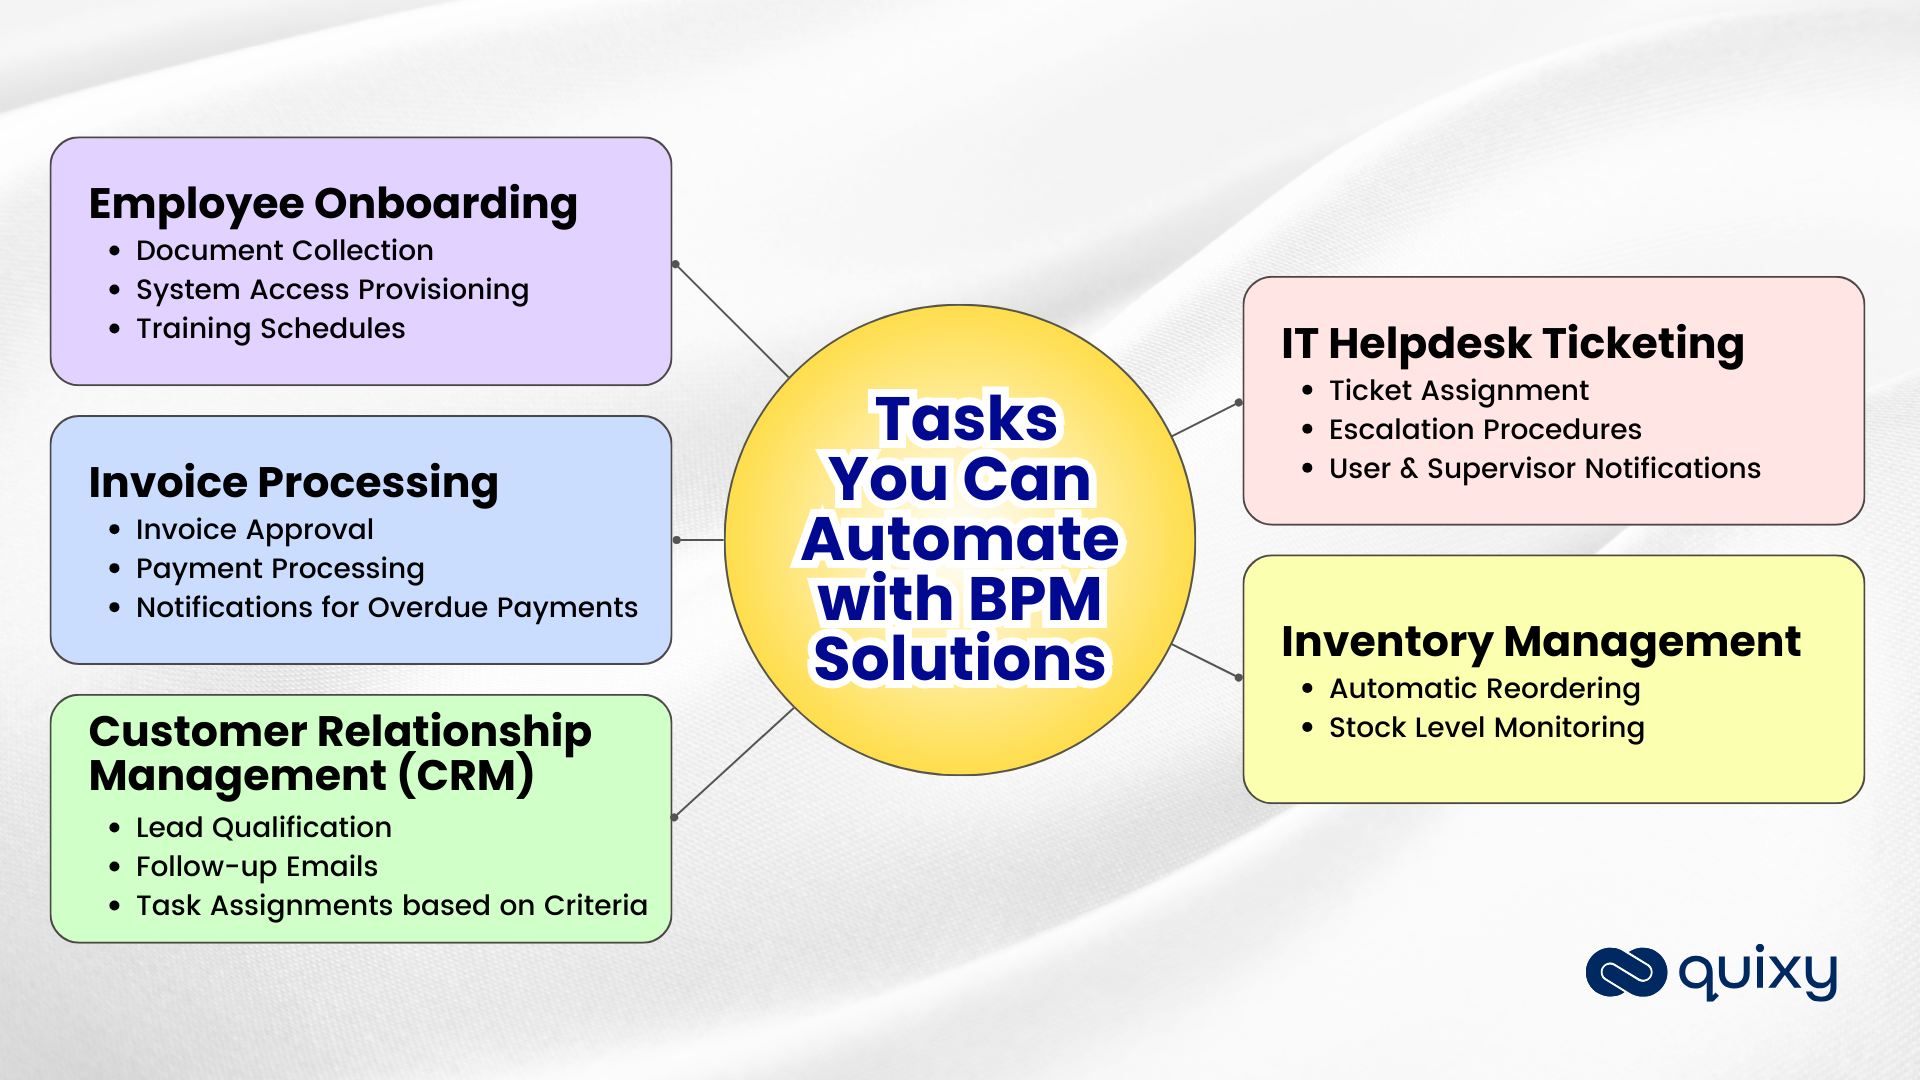 Tasks You Can Automate with BPM Solutions